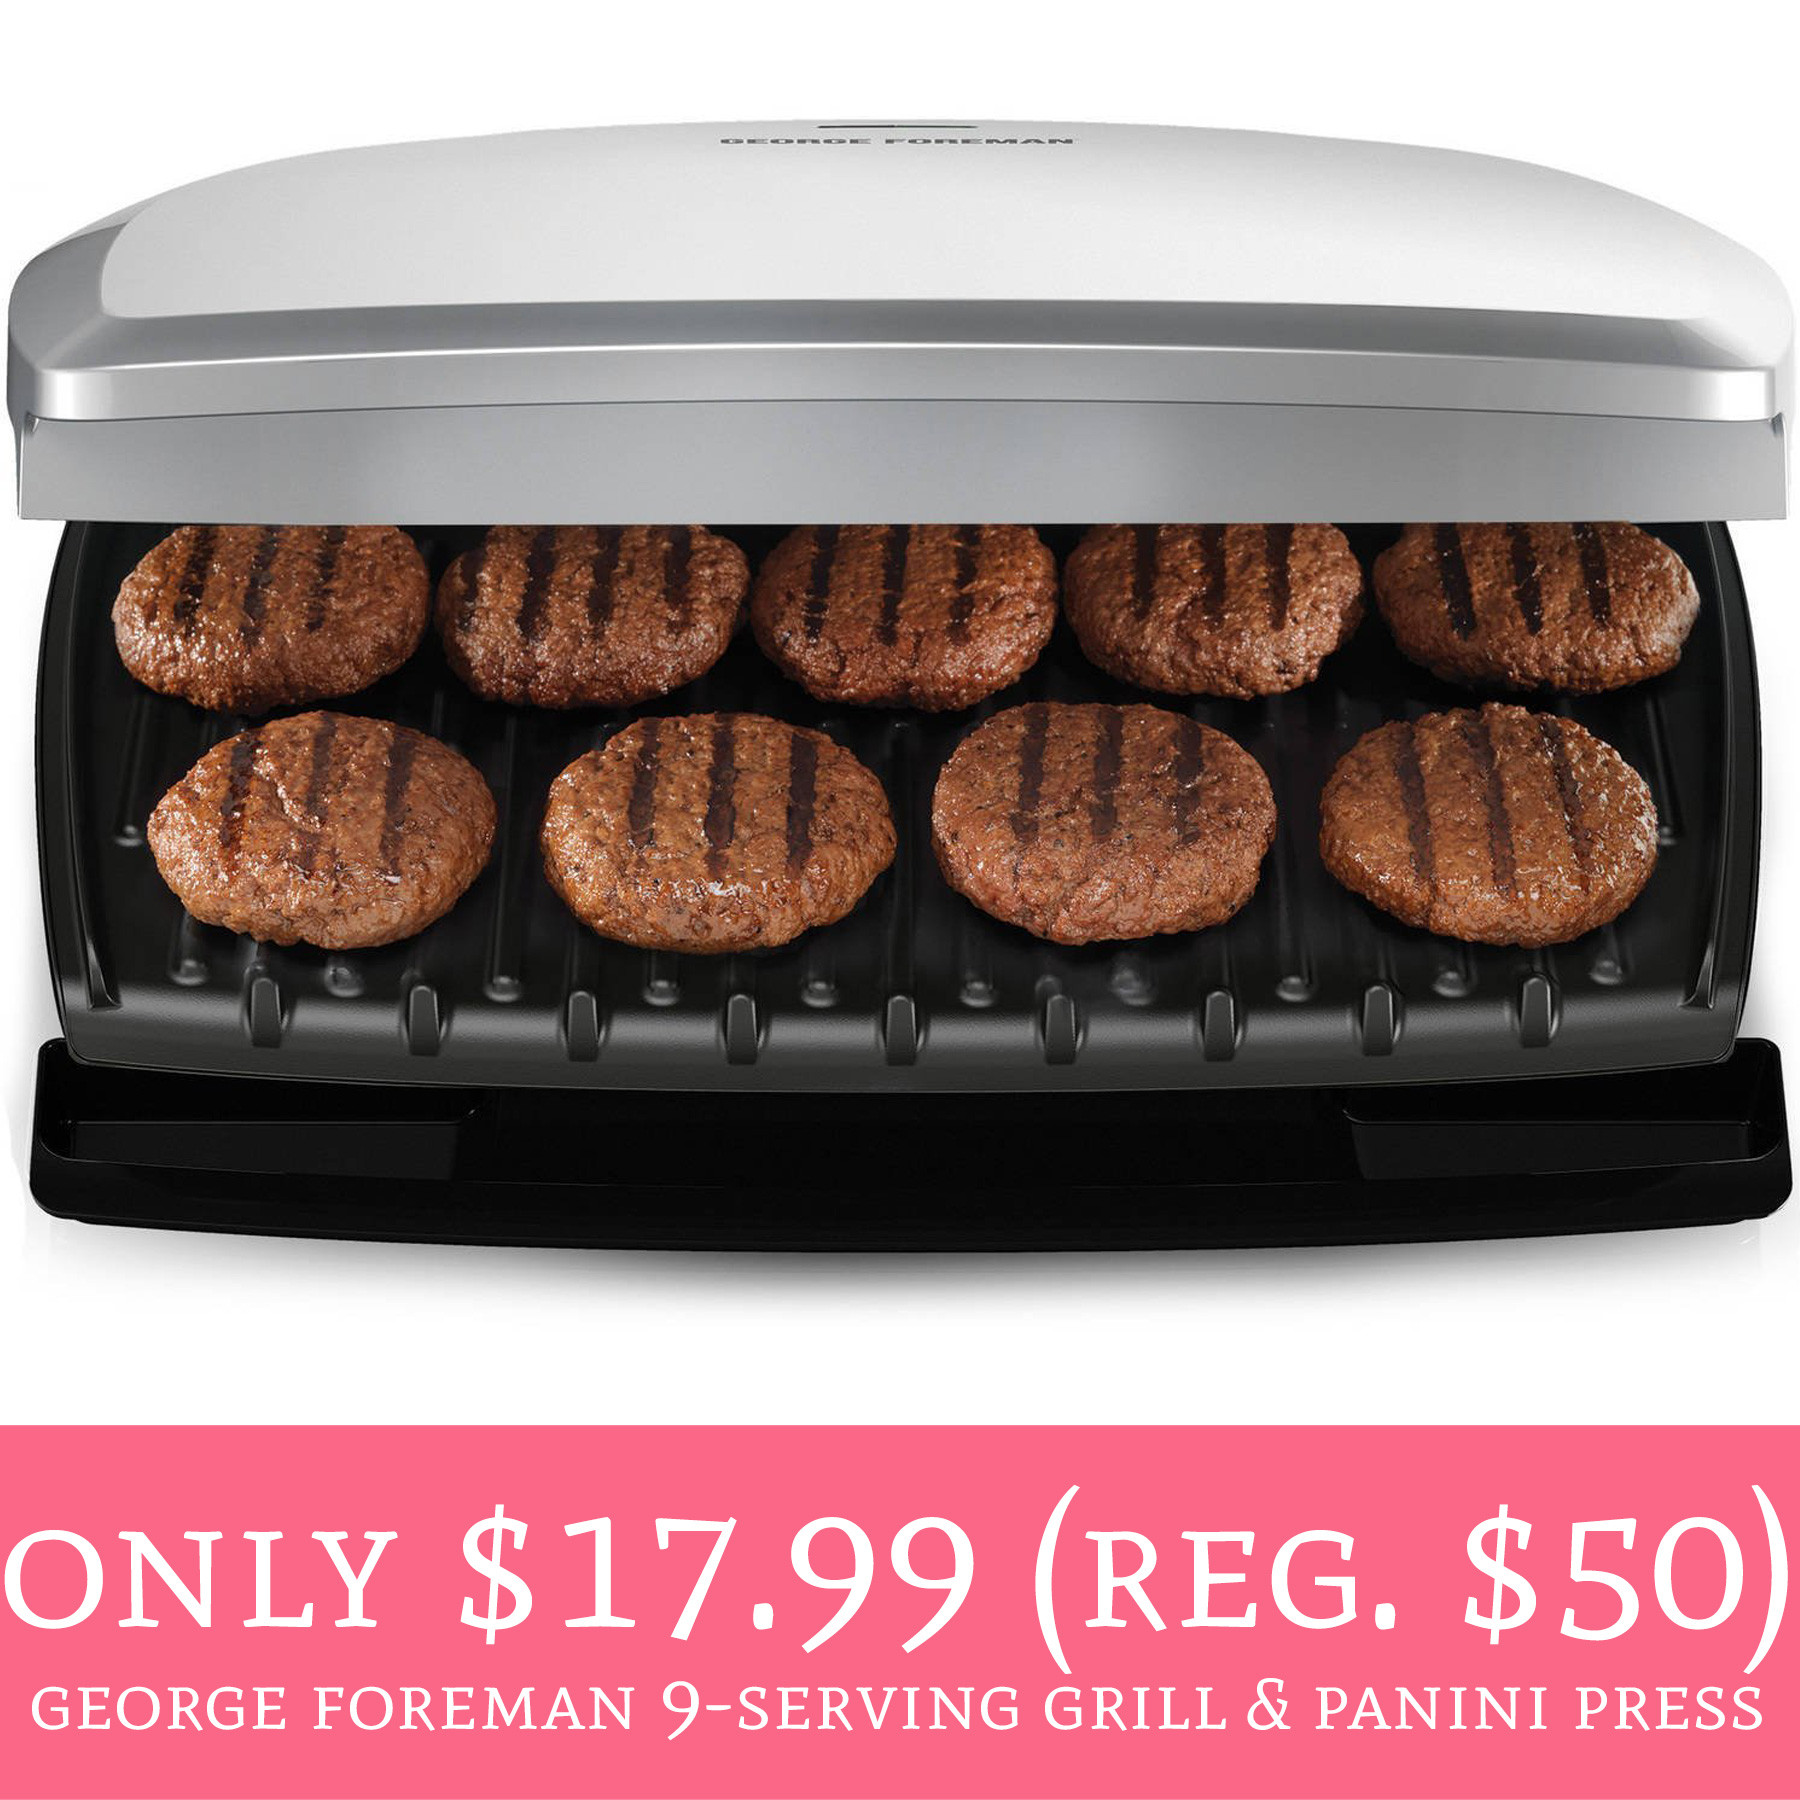 George Foreman Grill Recipes Panini
 ly $17 99 Regular $50 George Foreman 9 Serving Classic